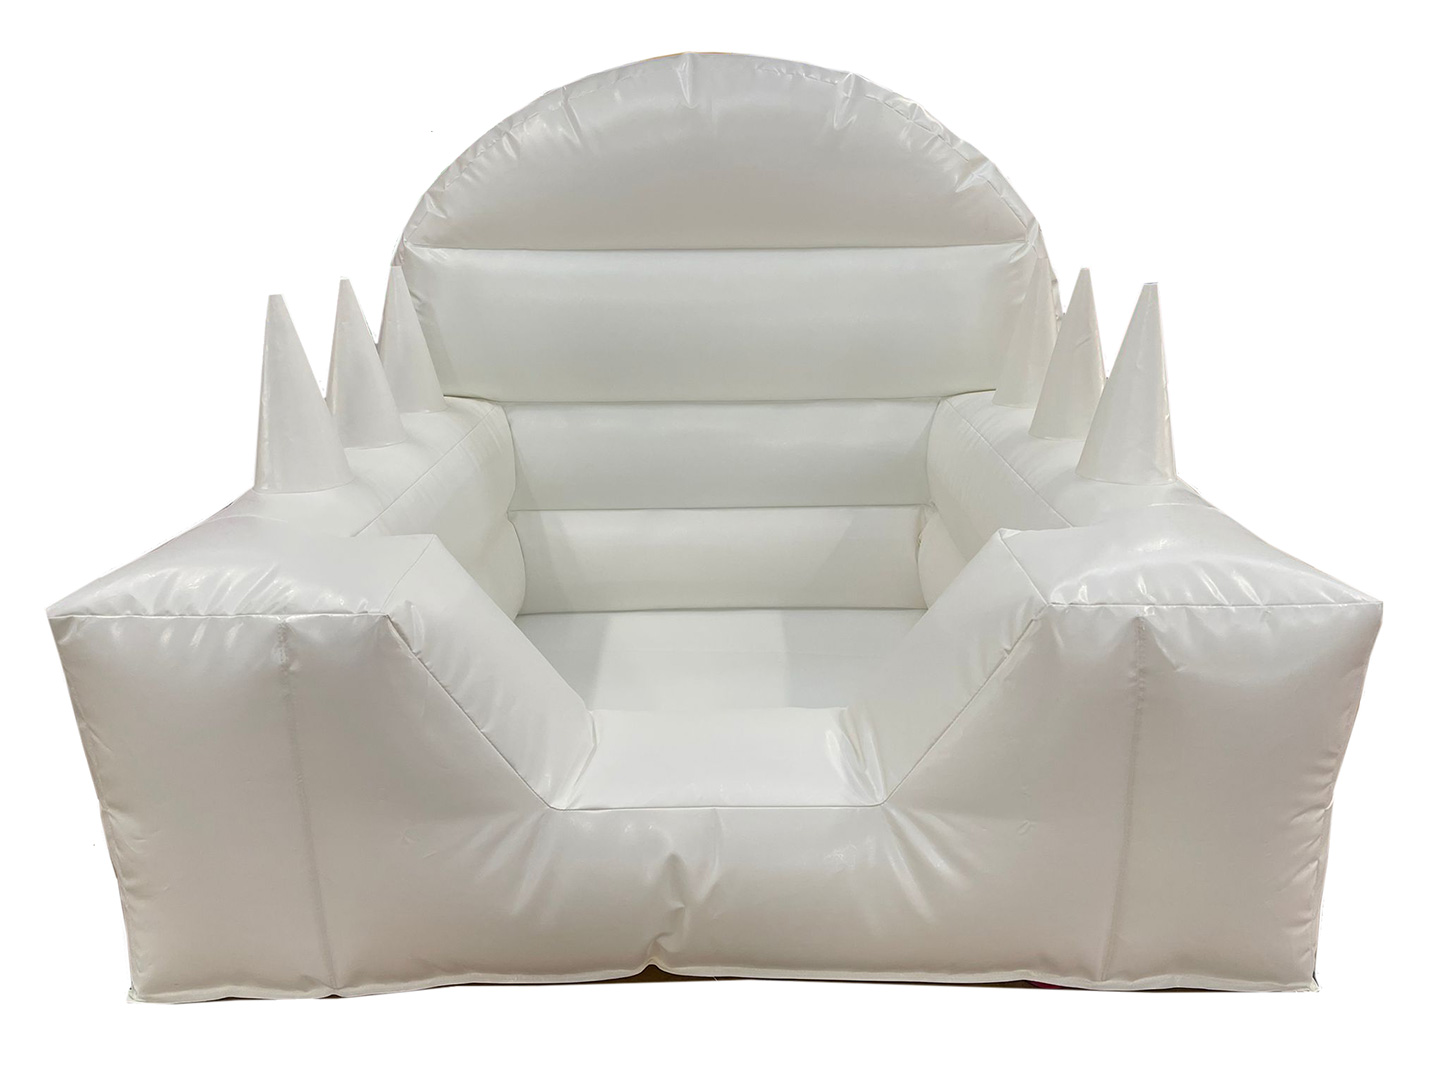 BC645 Deluxe Commercial Bouncy Inflatable larger view